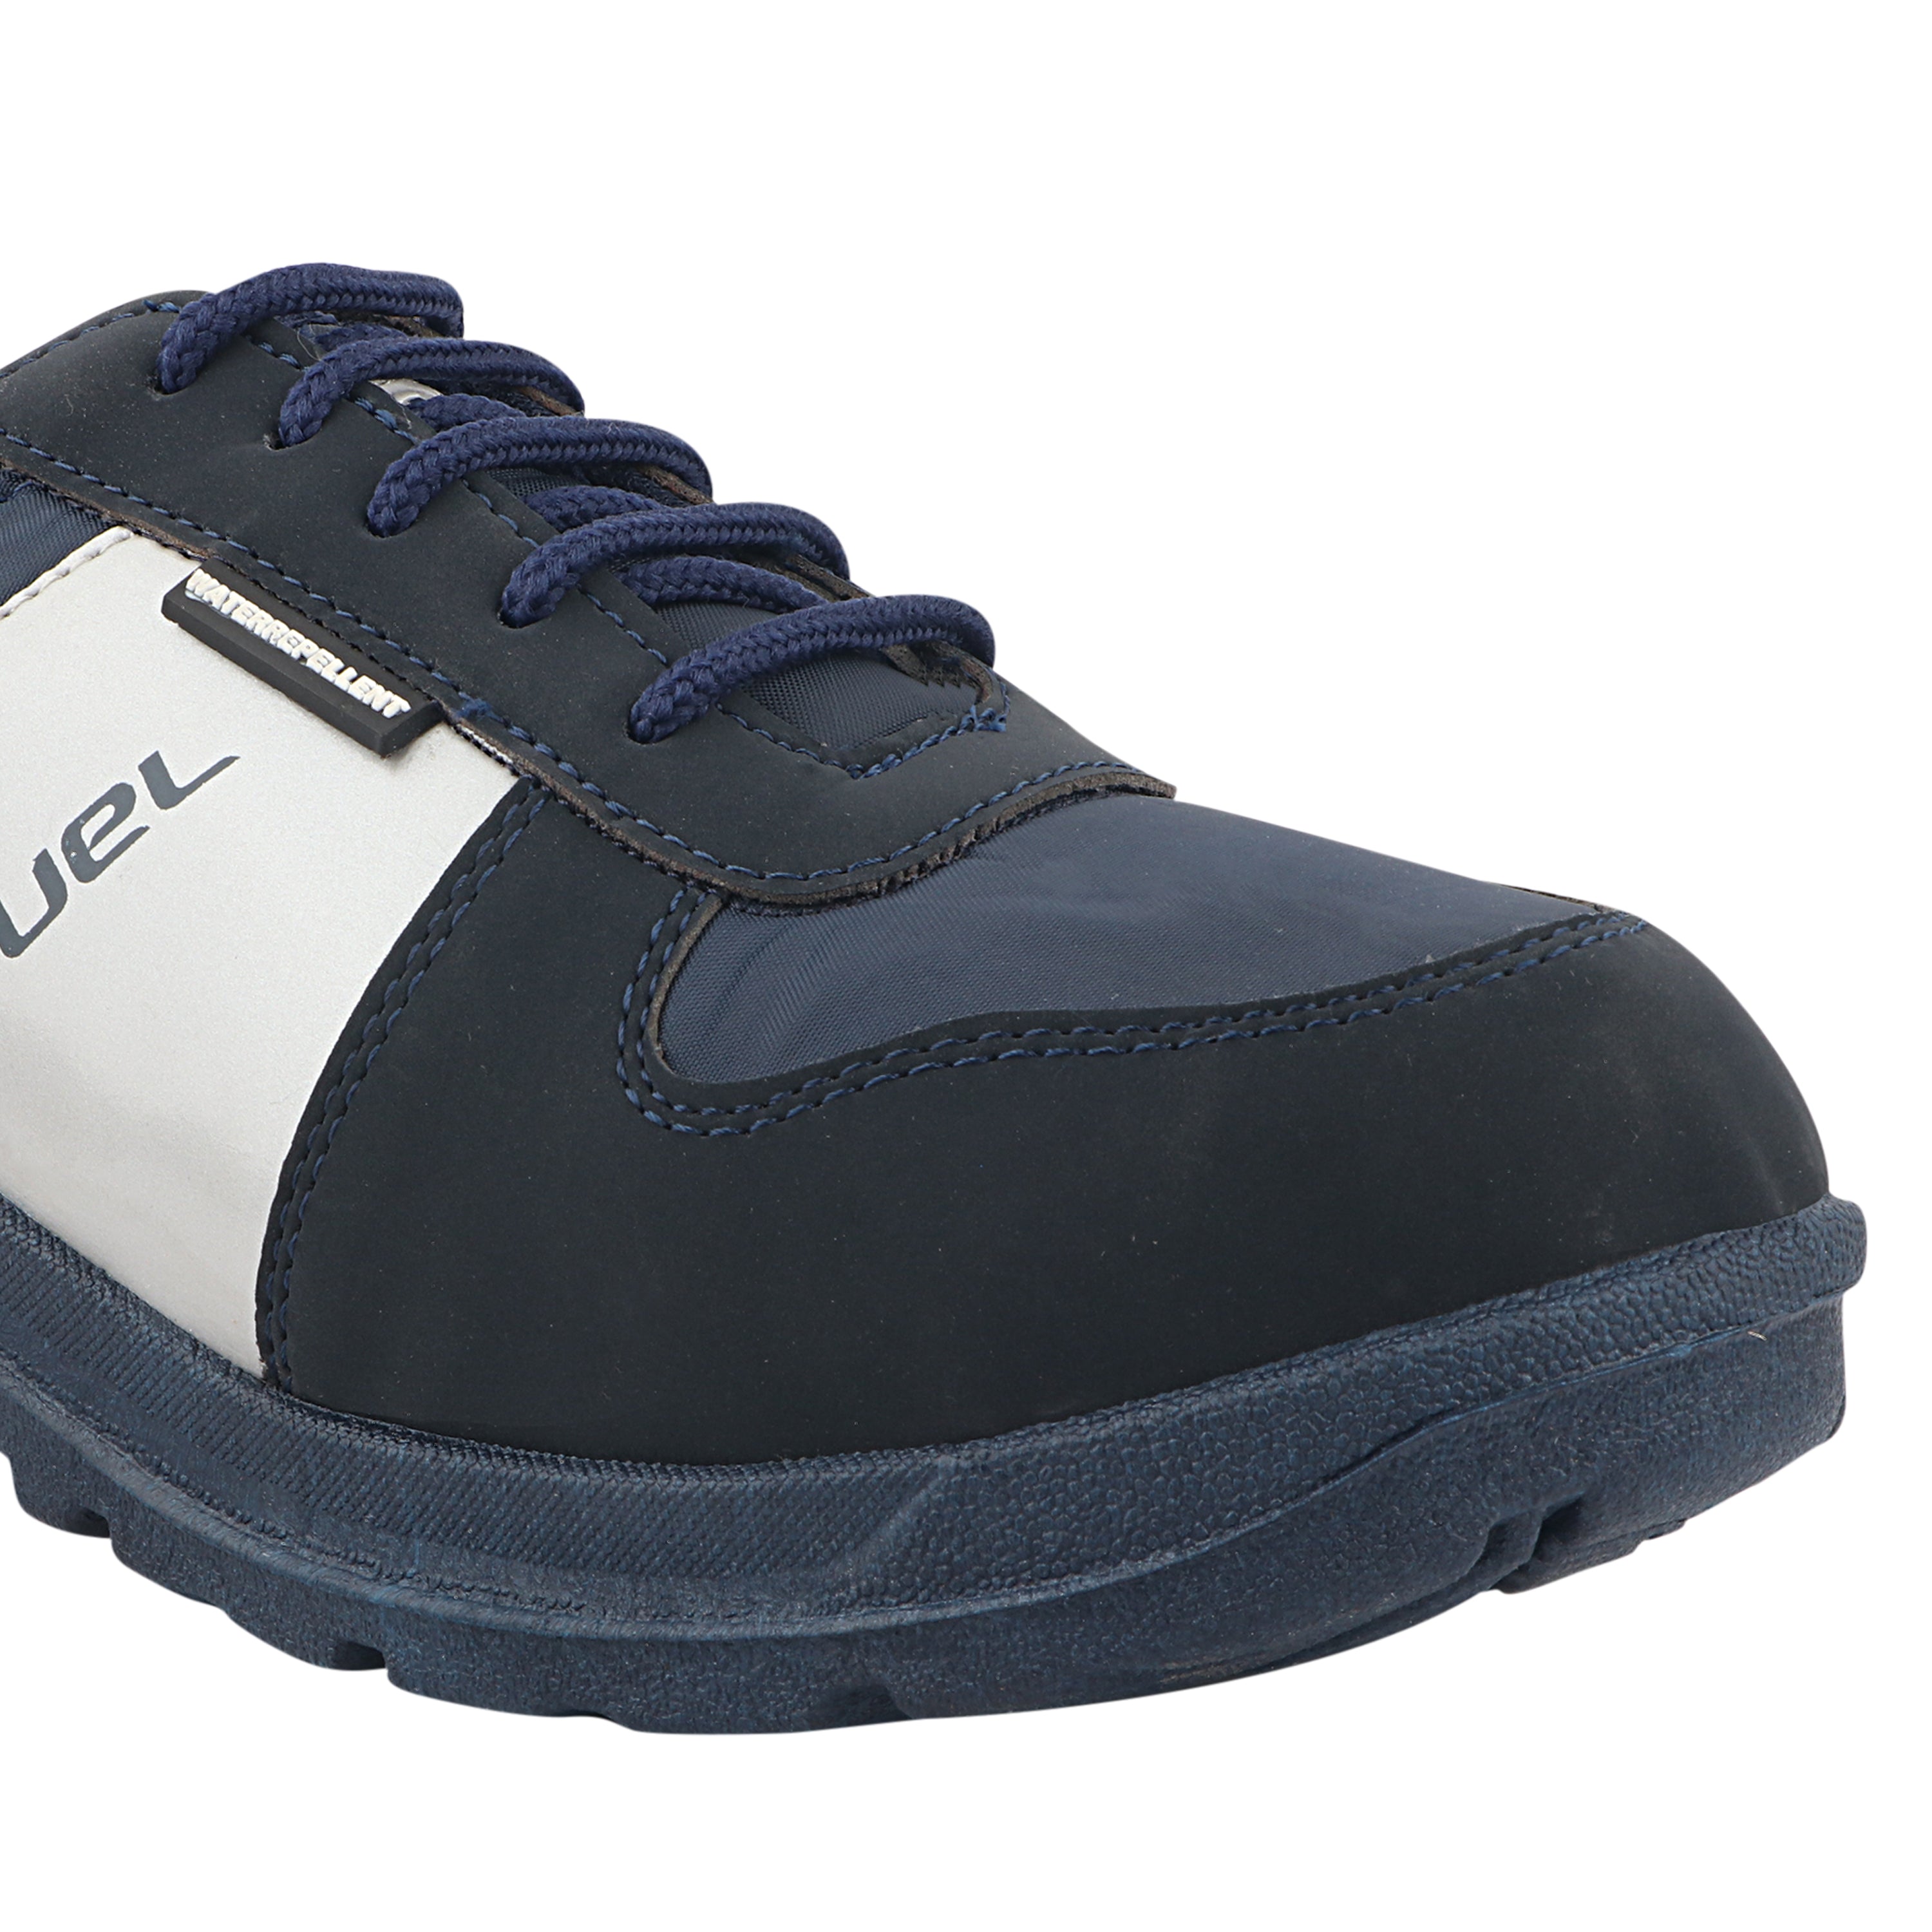 Fuel Ultra Breathable Upper Safety Shoes for Men's Steel Toe With Single Density PVC Sole (Blue)